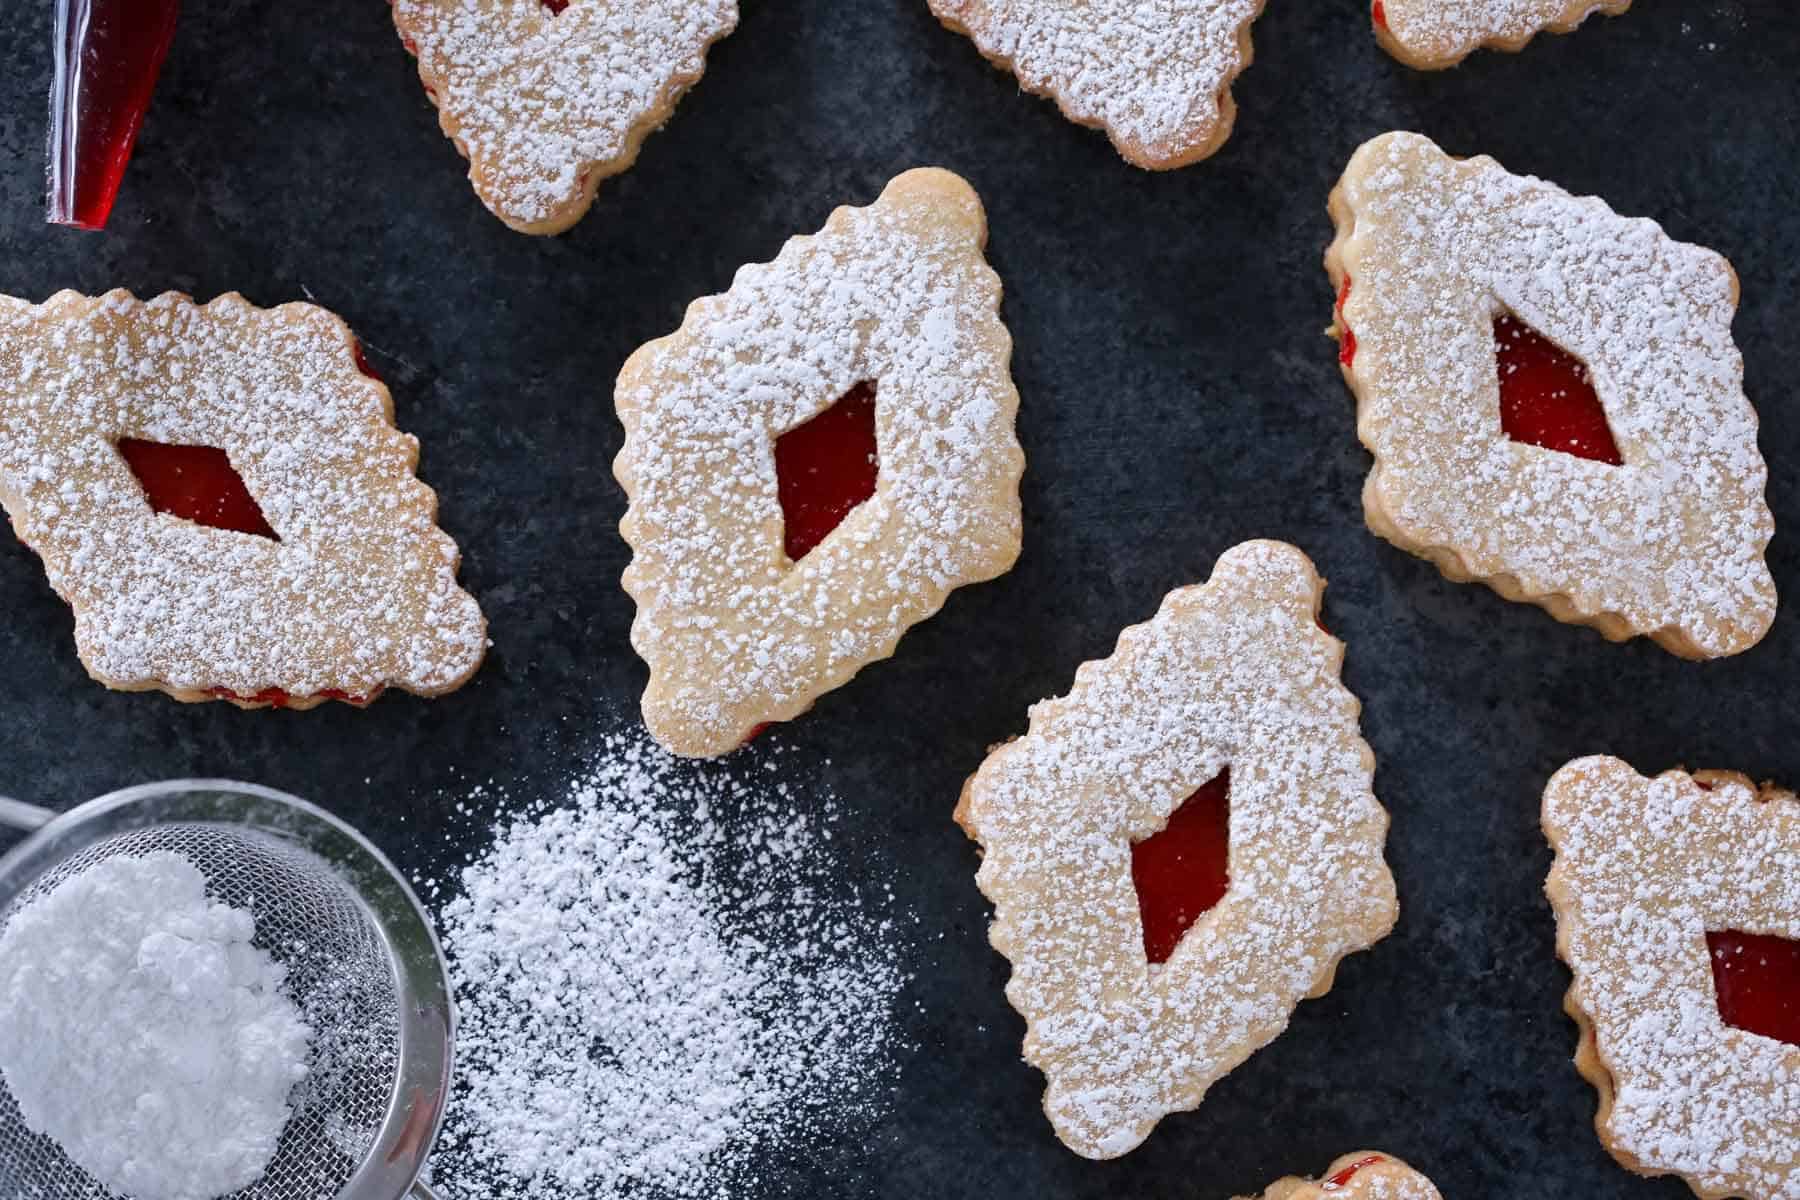 raspberry linzer cookies in diamond shapes on grey surface.